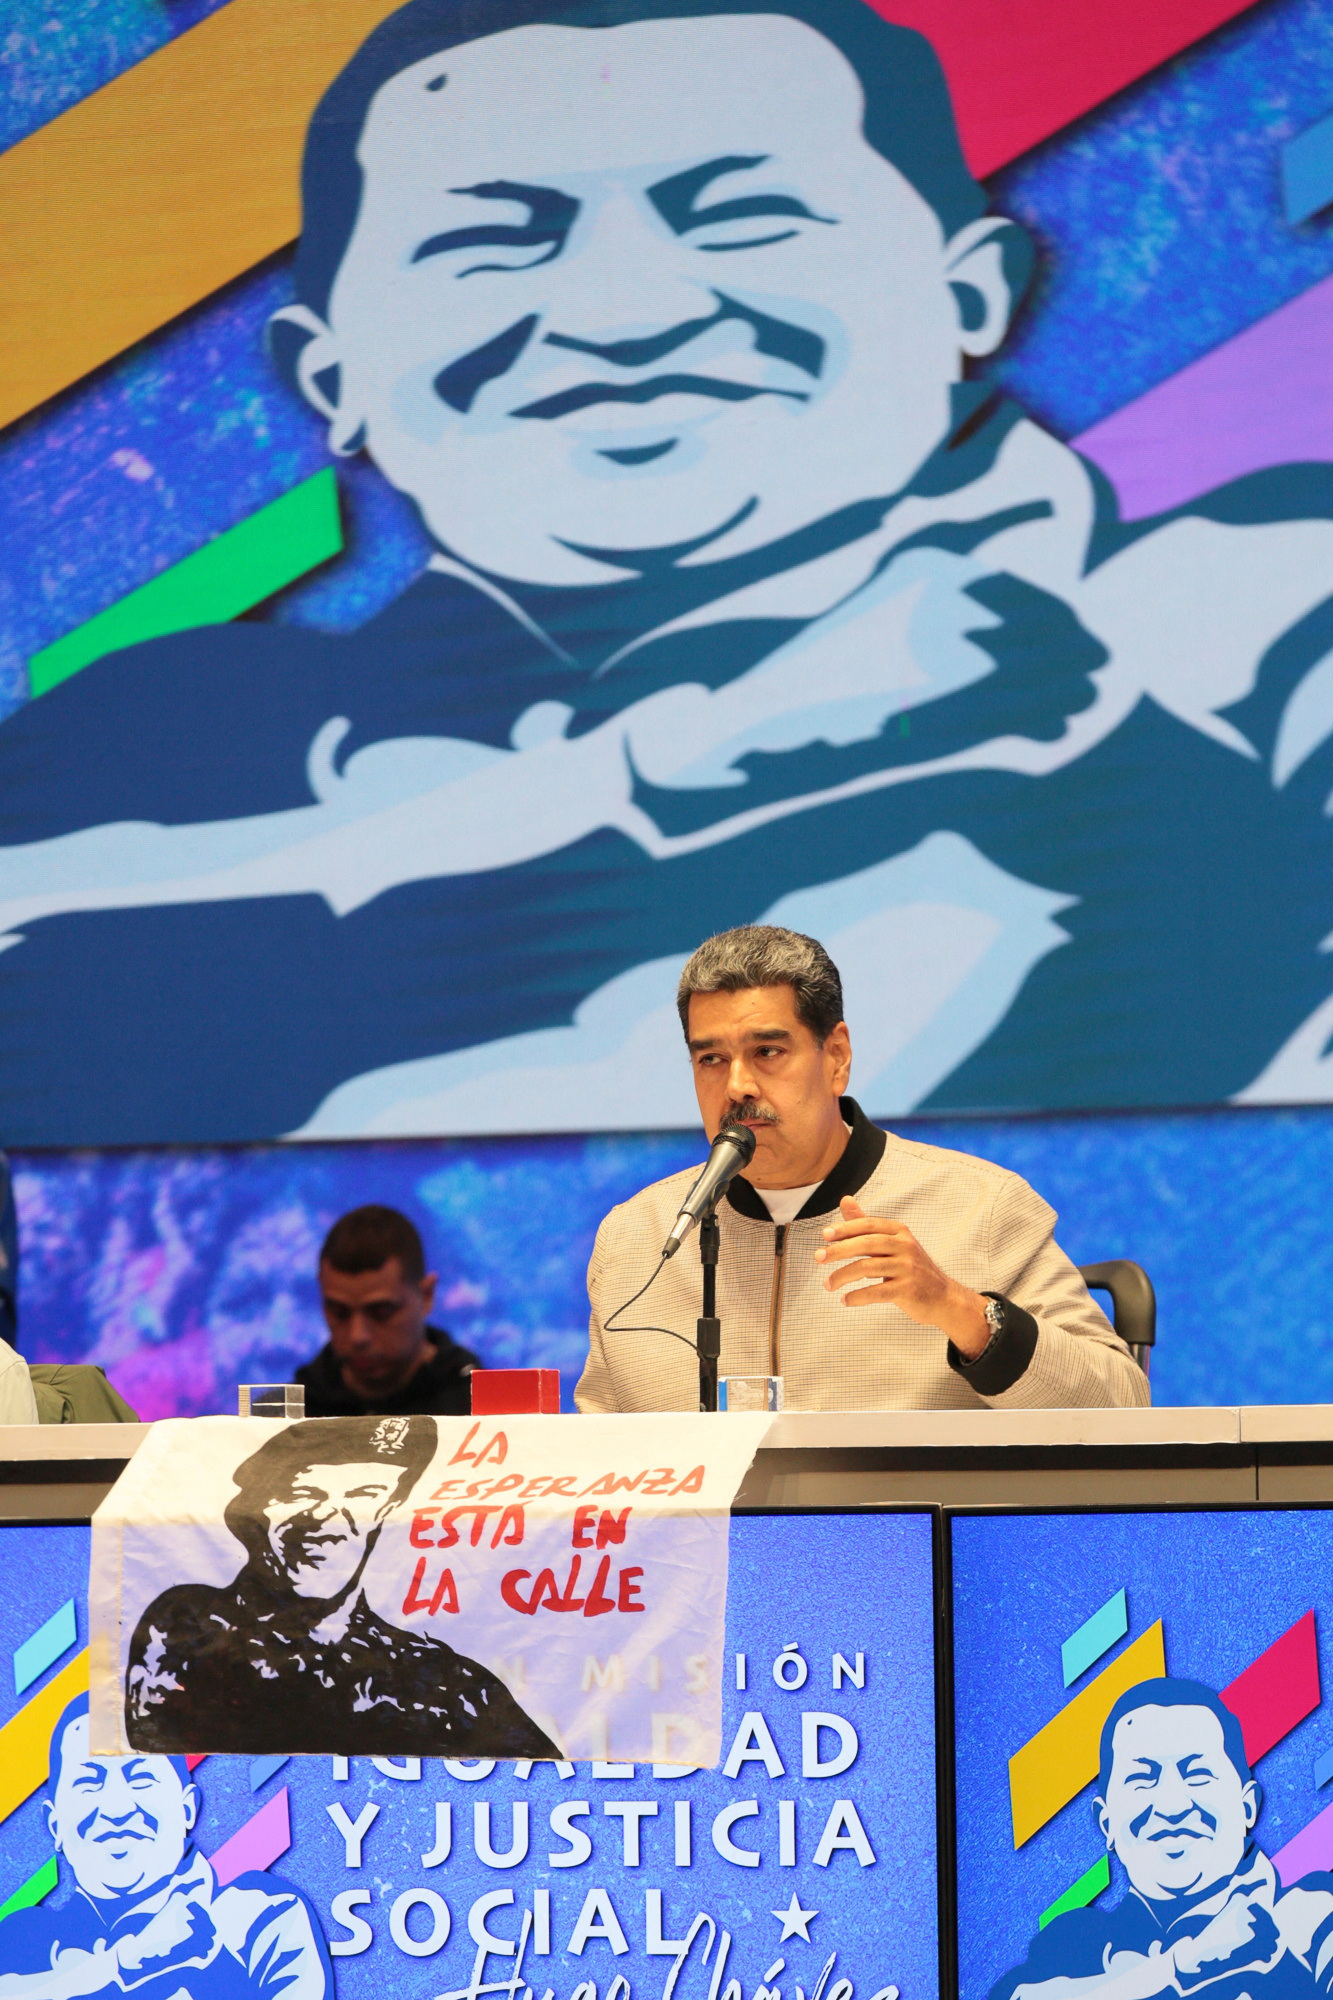 Venezuela's President Nicolas Maduro delivers a speech during an event in Caracas